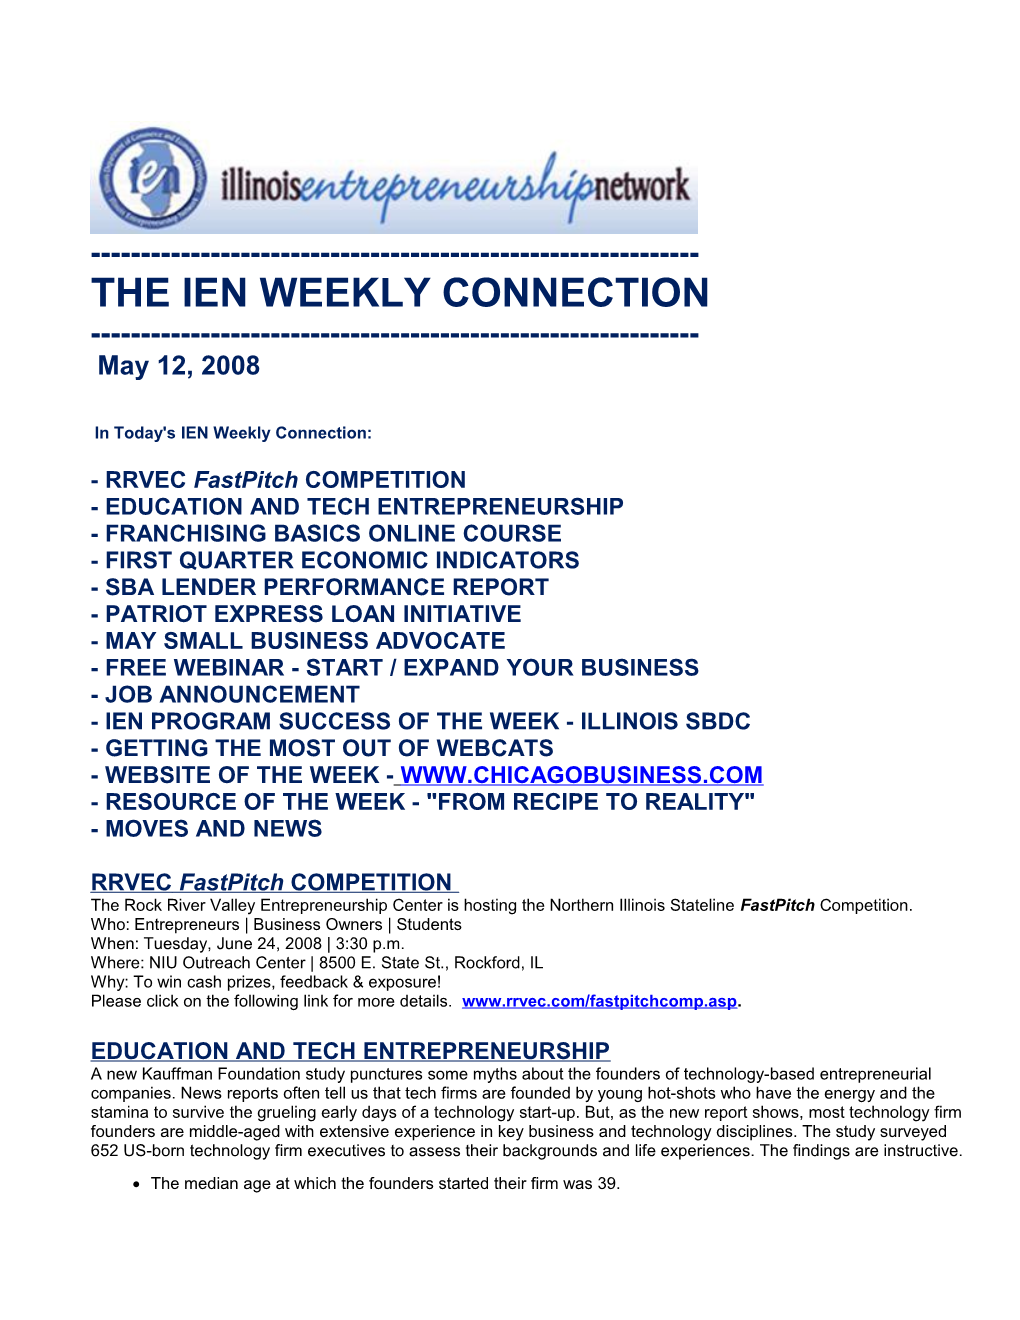 In Today'sien Weekly Connection